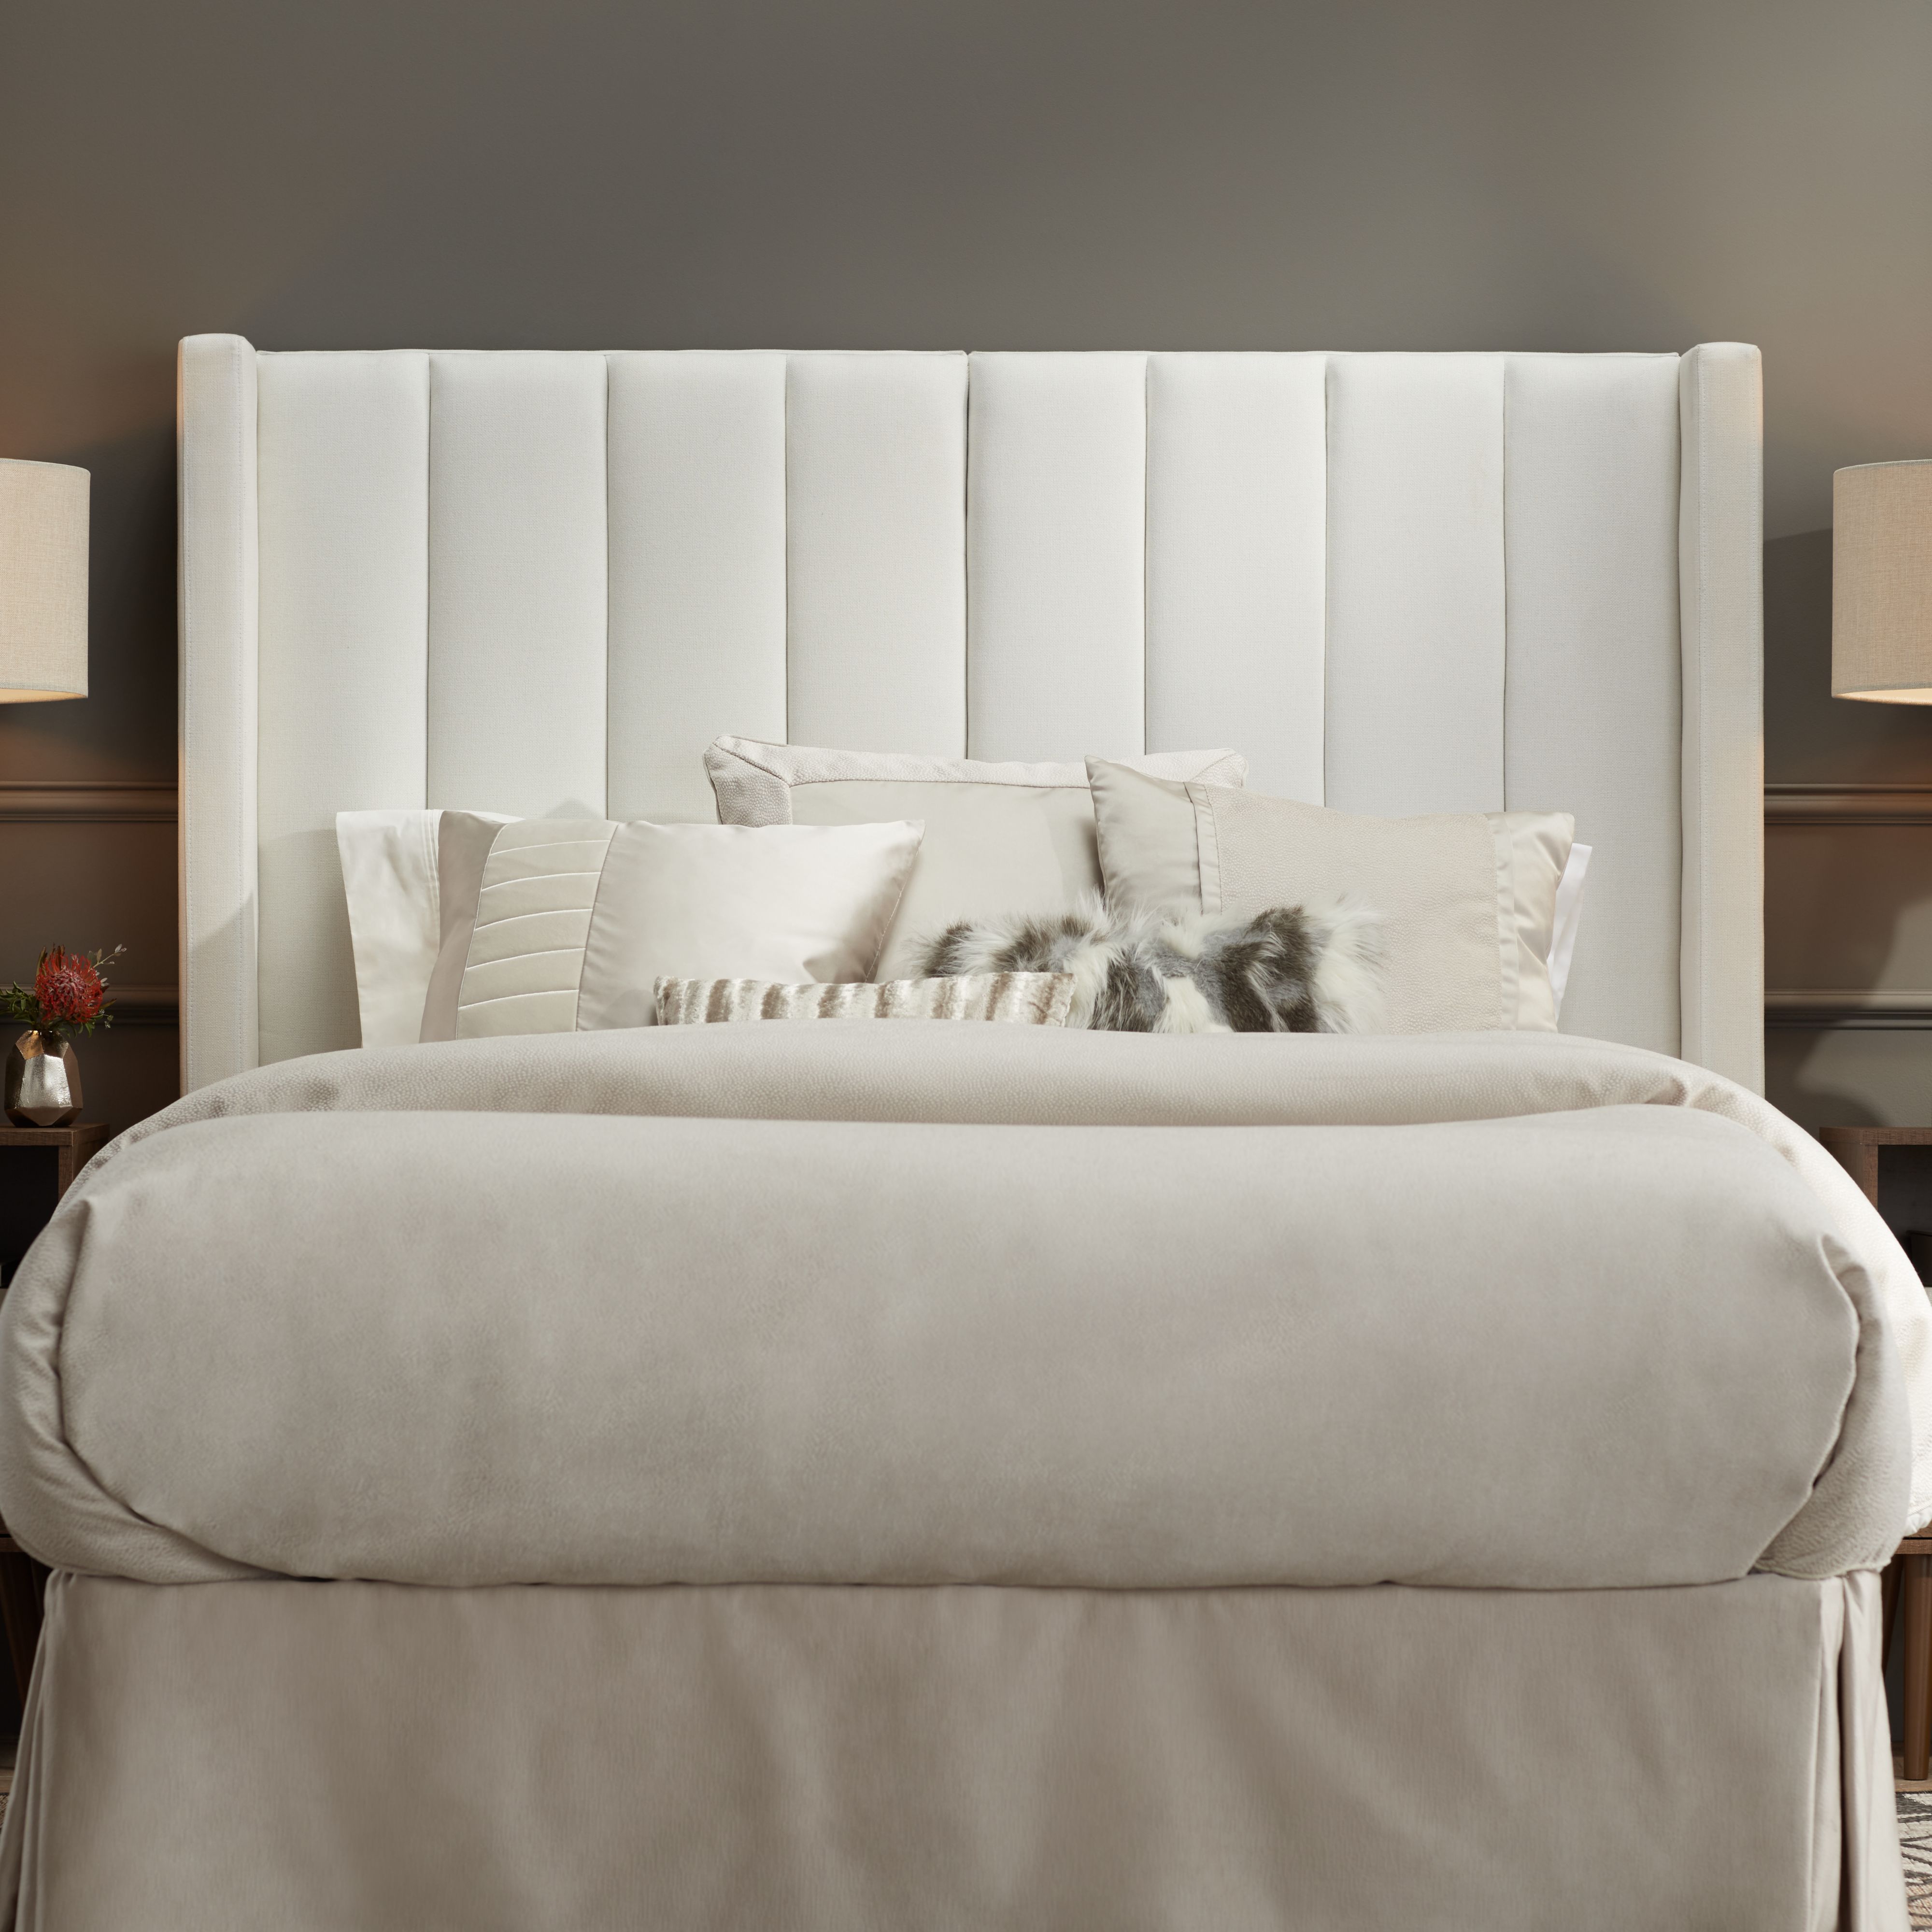 white headboard with lights